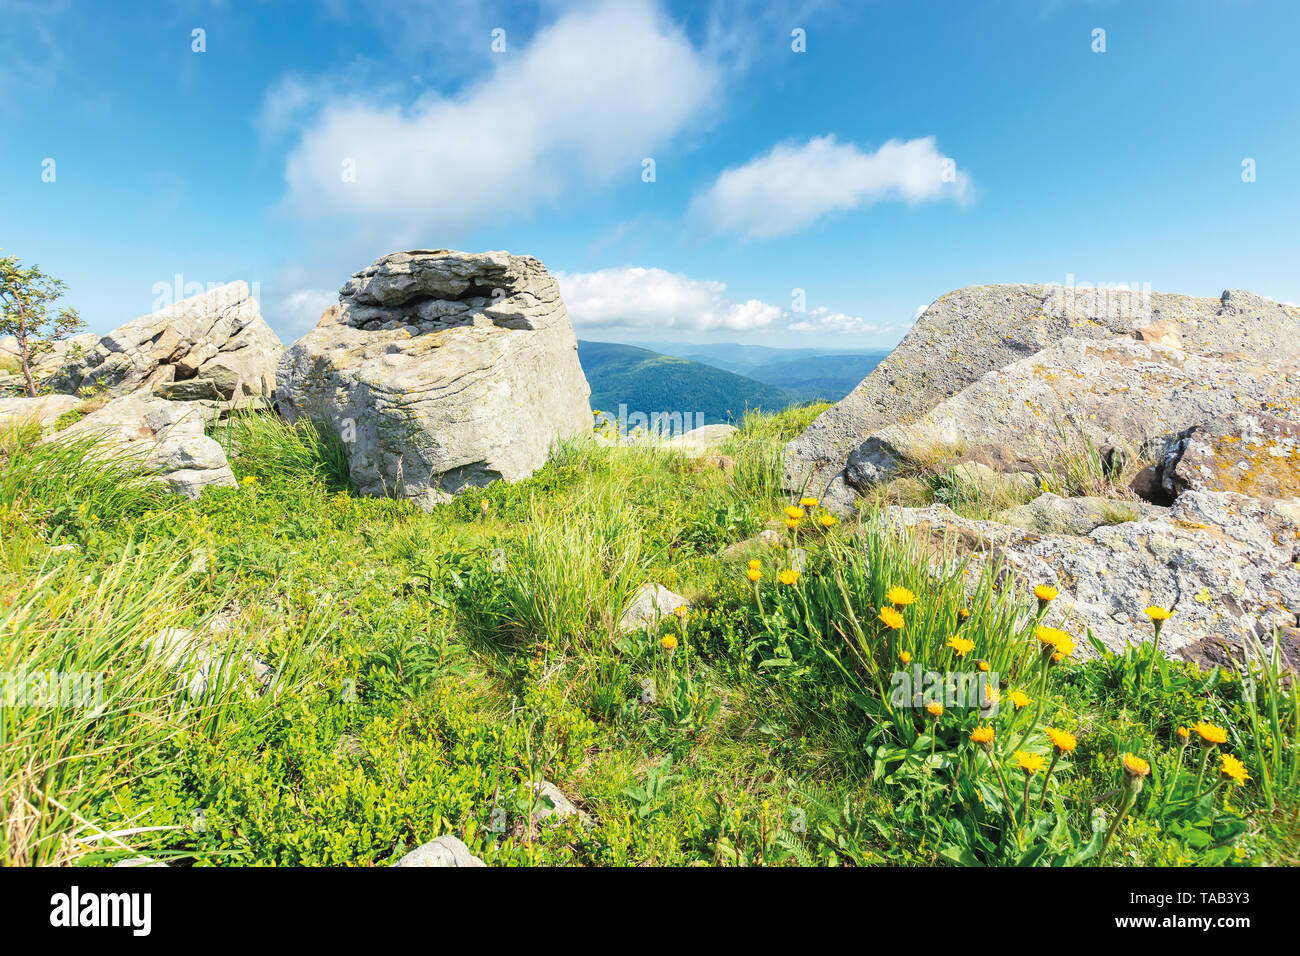 summer nature scene on top of a hill. yellow dandelions among rocks on a grassy slope. sunny weather with clouds on the blue sky. peaceful forenoon Stock Photo